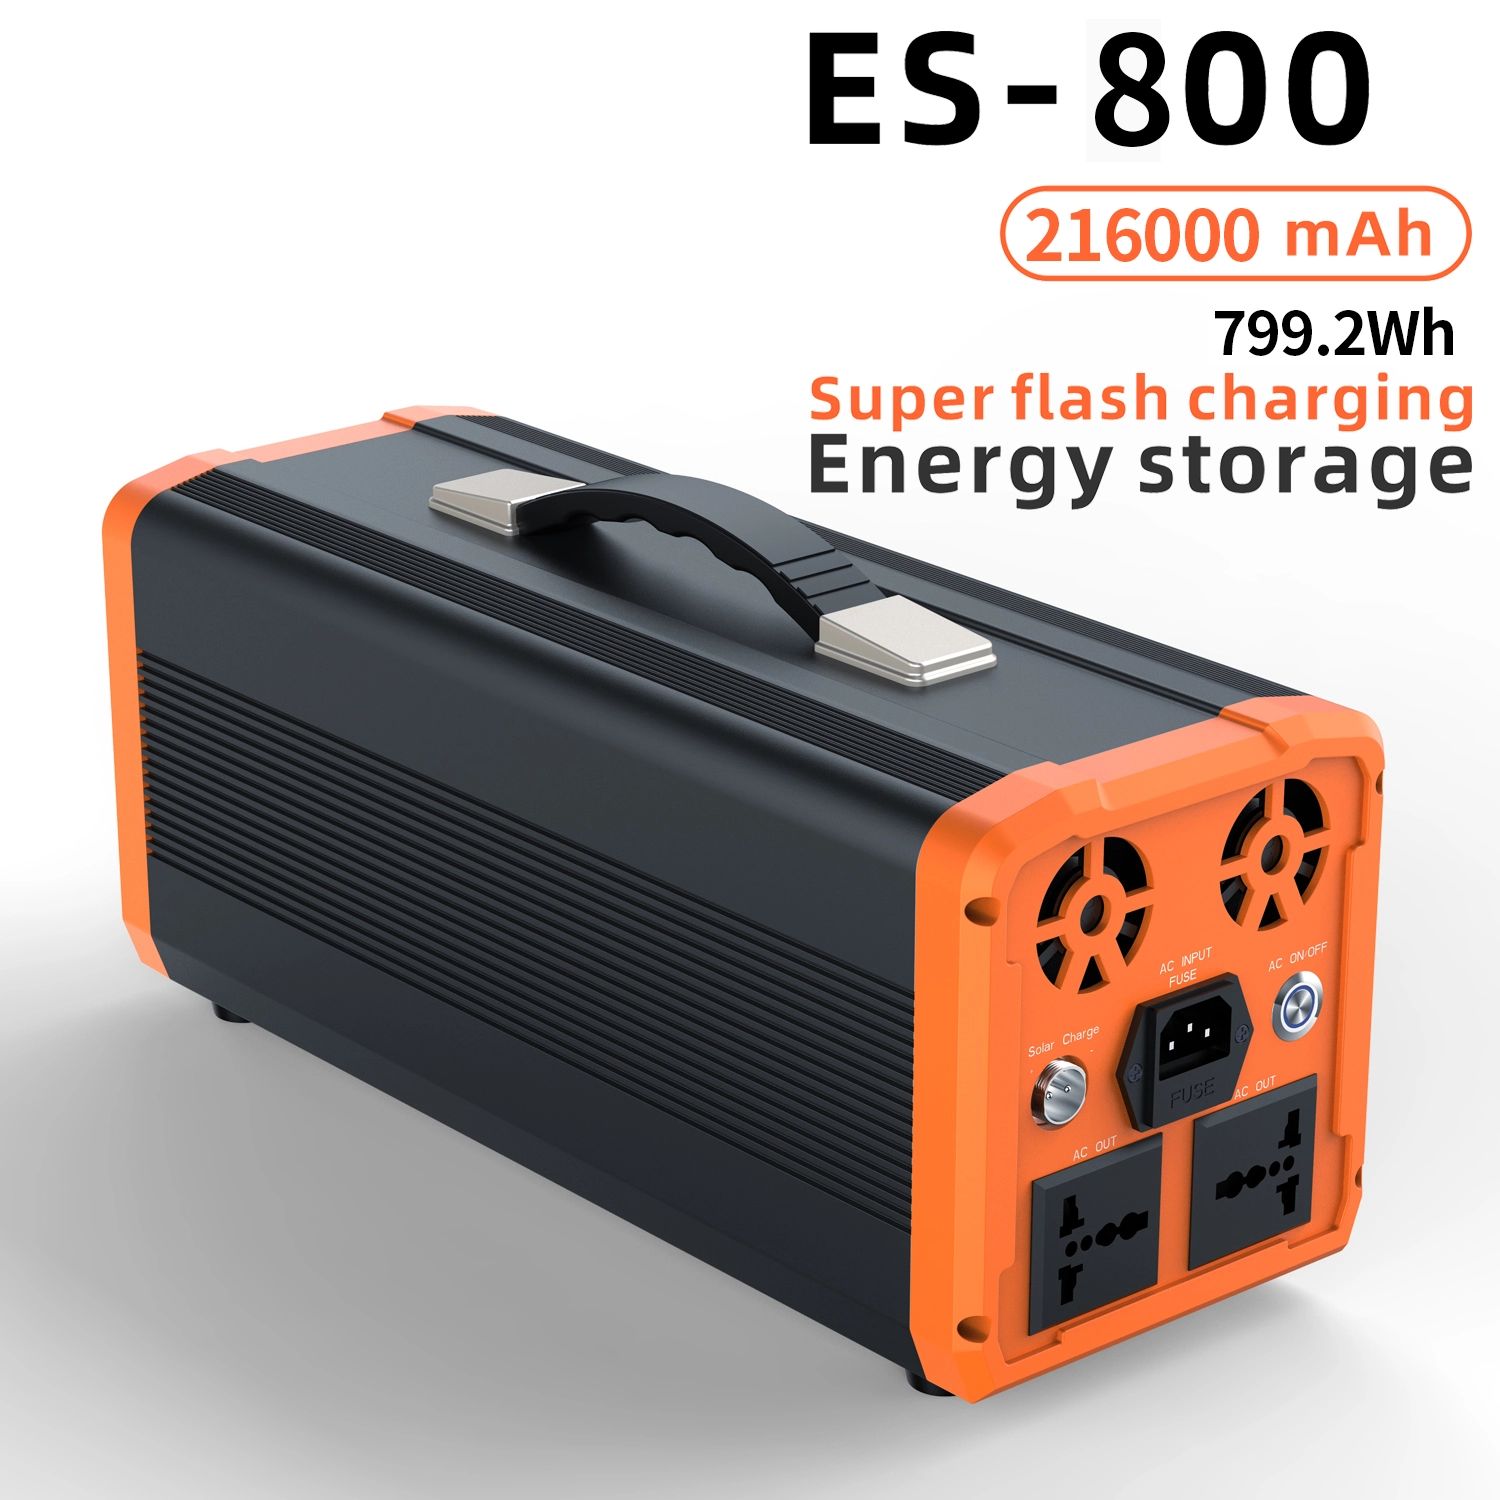 ES-800 Energy Storage Power solar inverter for outdoor use with lithium battery